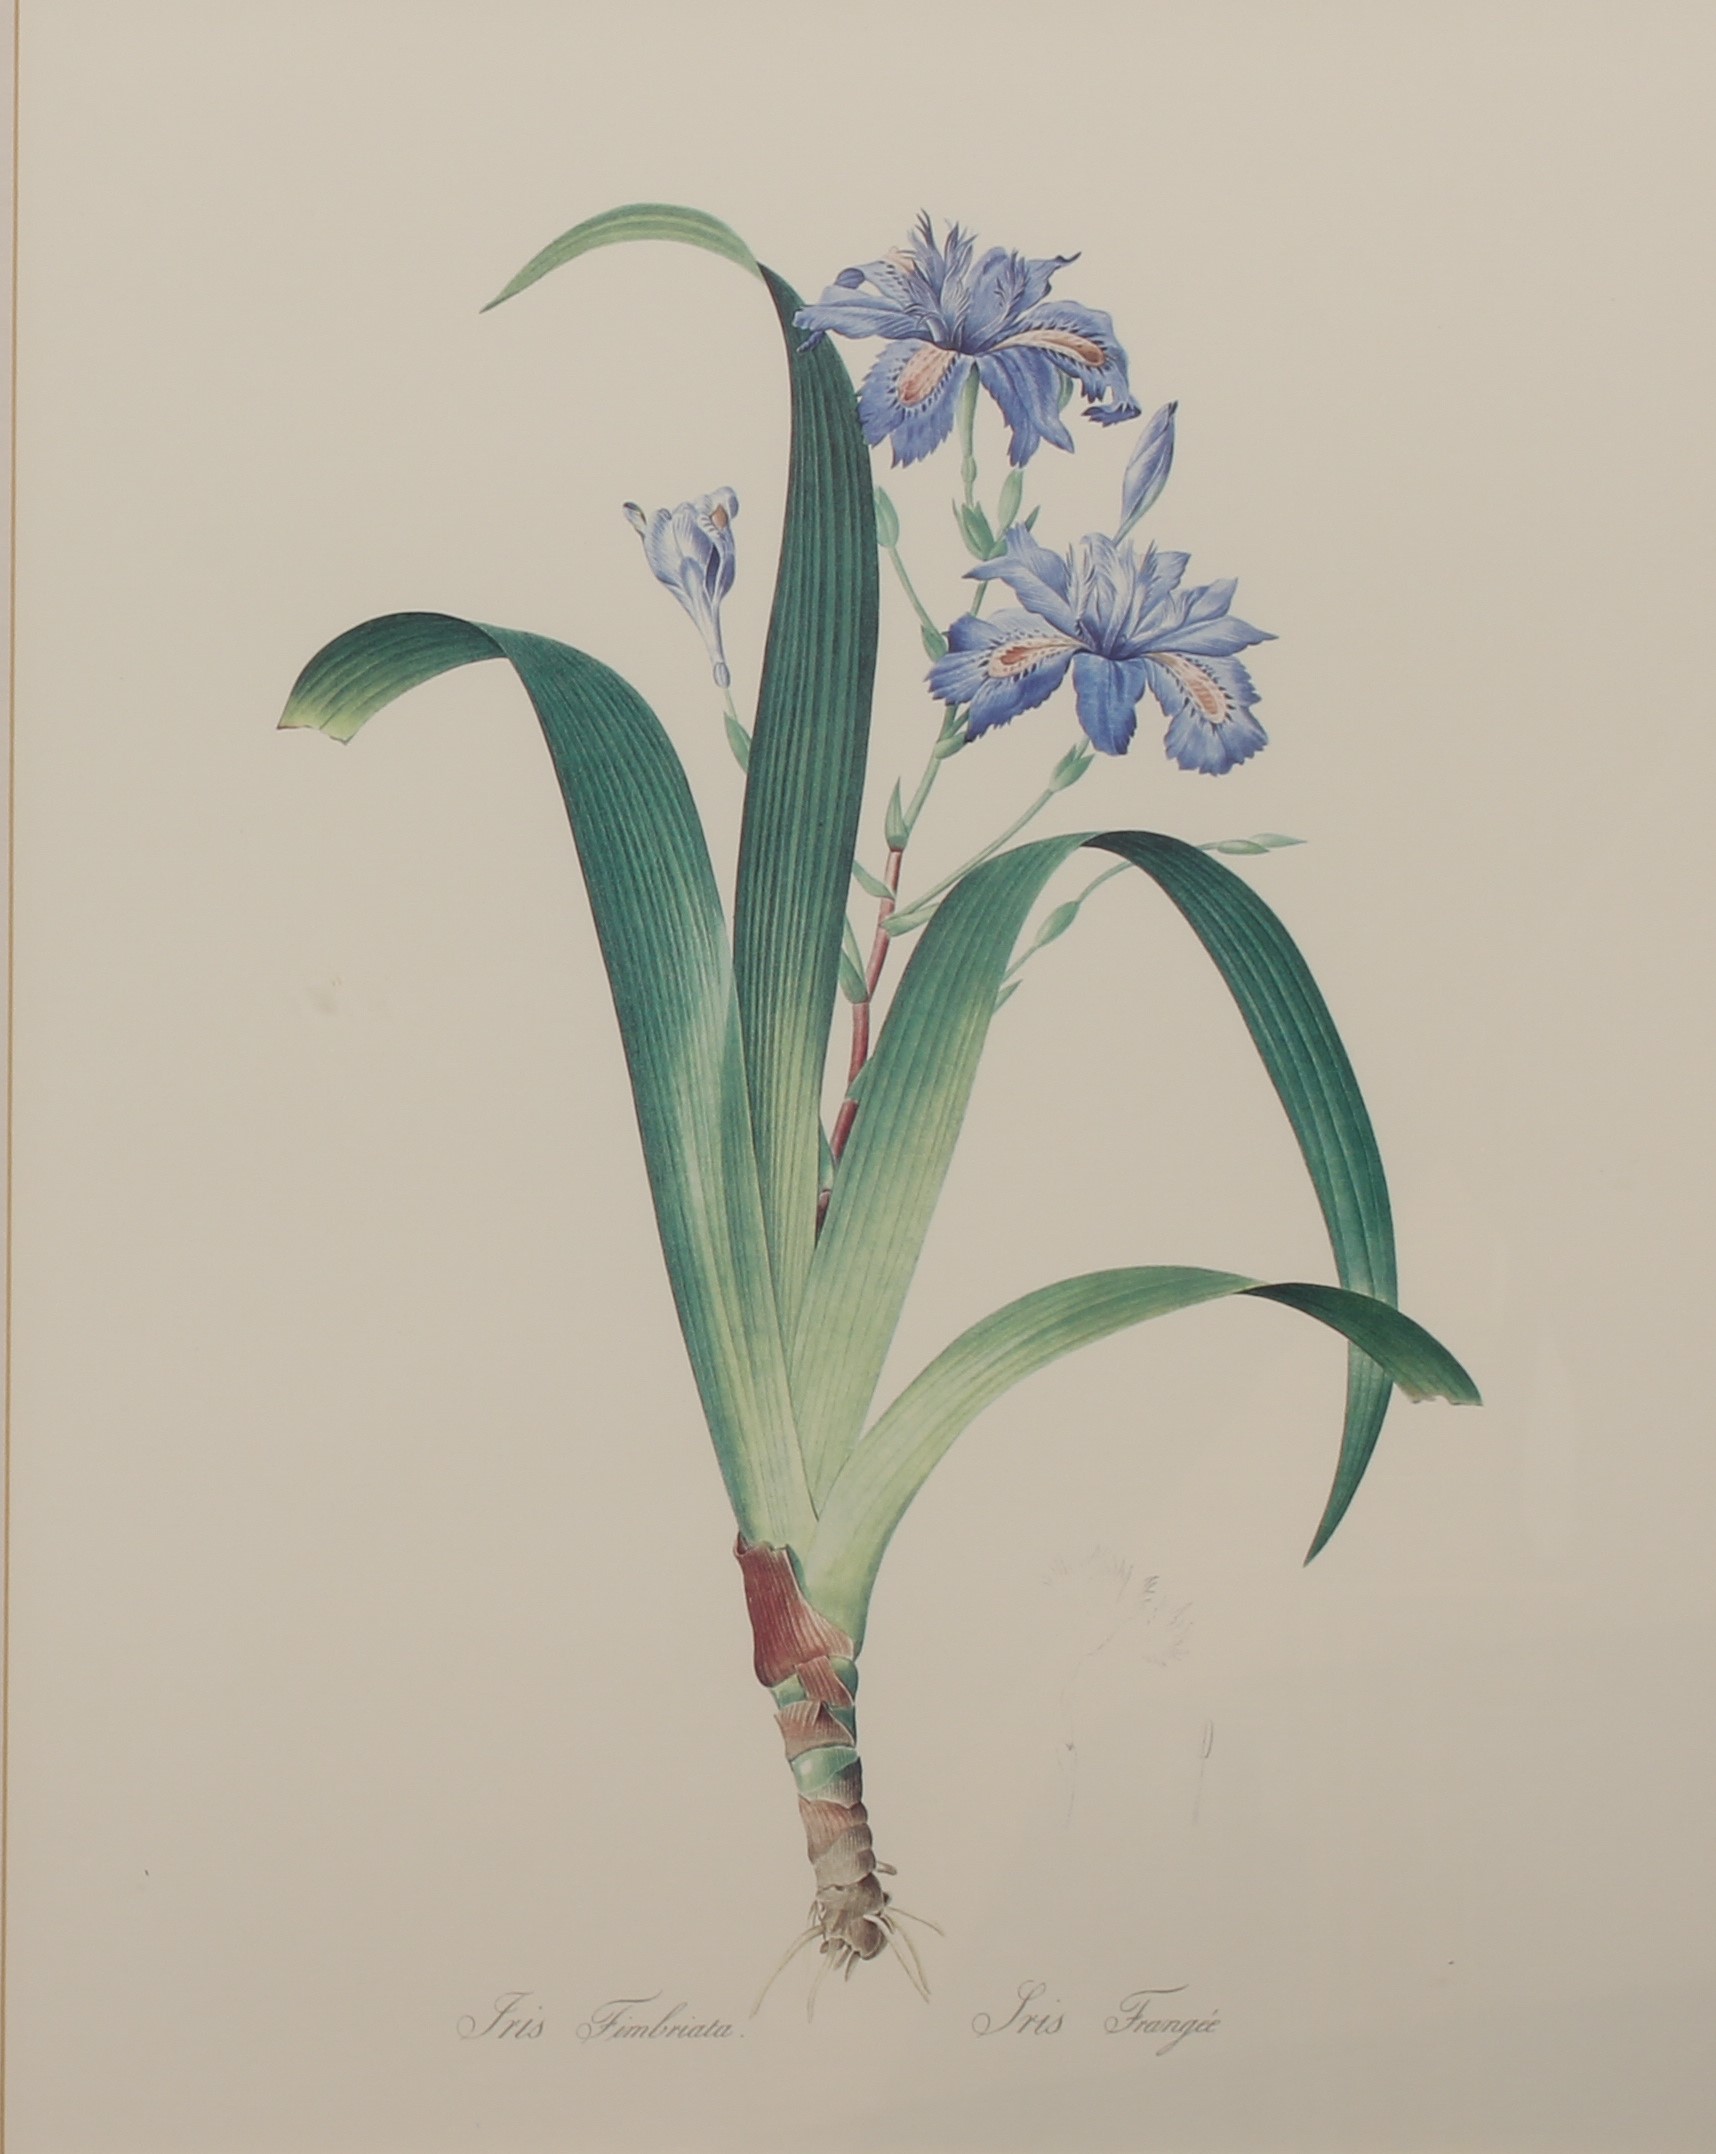 After Christophe Jacob Trew and Pierre Joseph Redoute: a set of three botanical prints - modern - Image 3 of 6